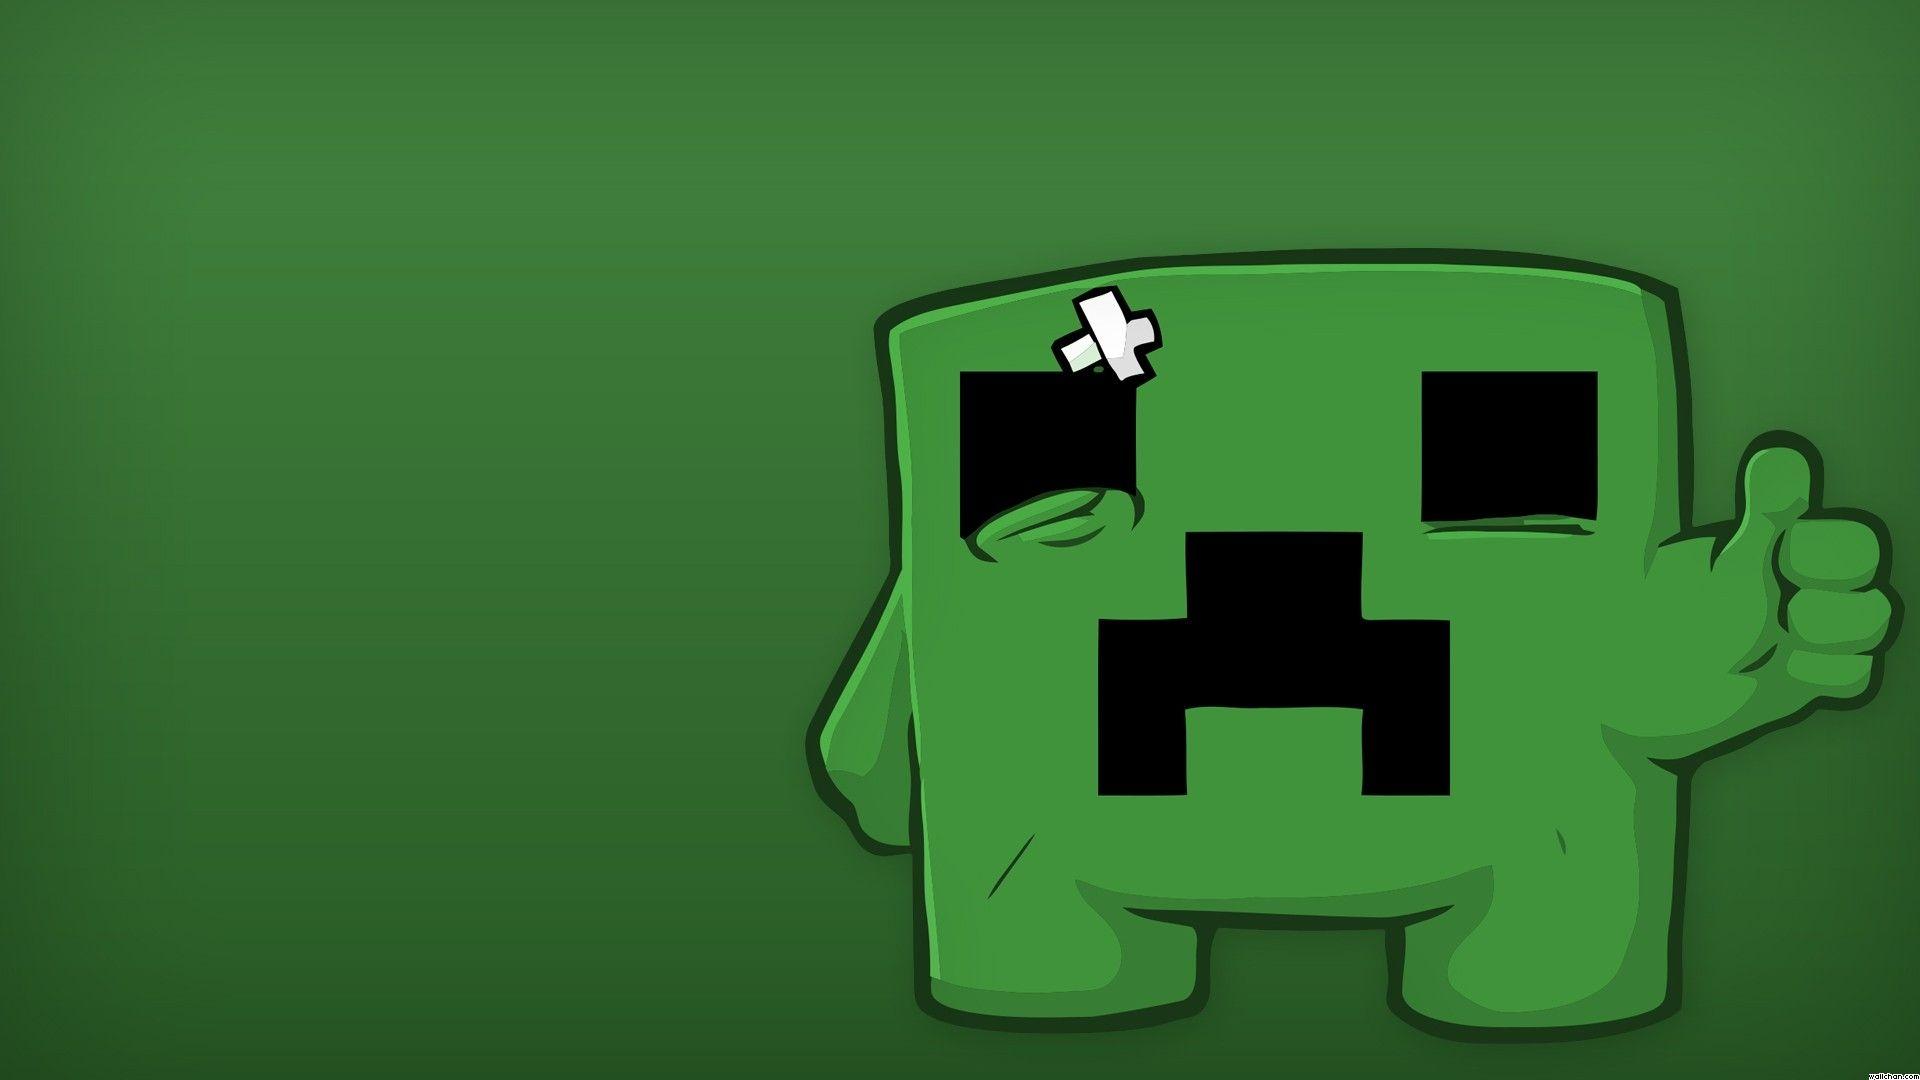 Minecraft HD Wallpaper and Background